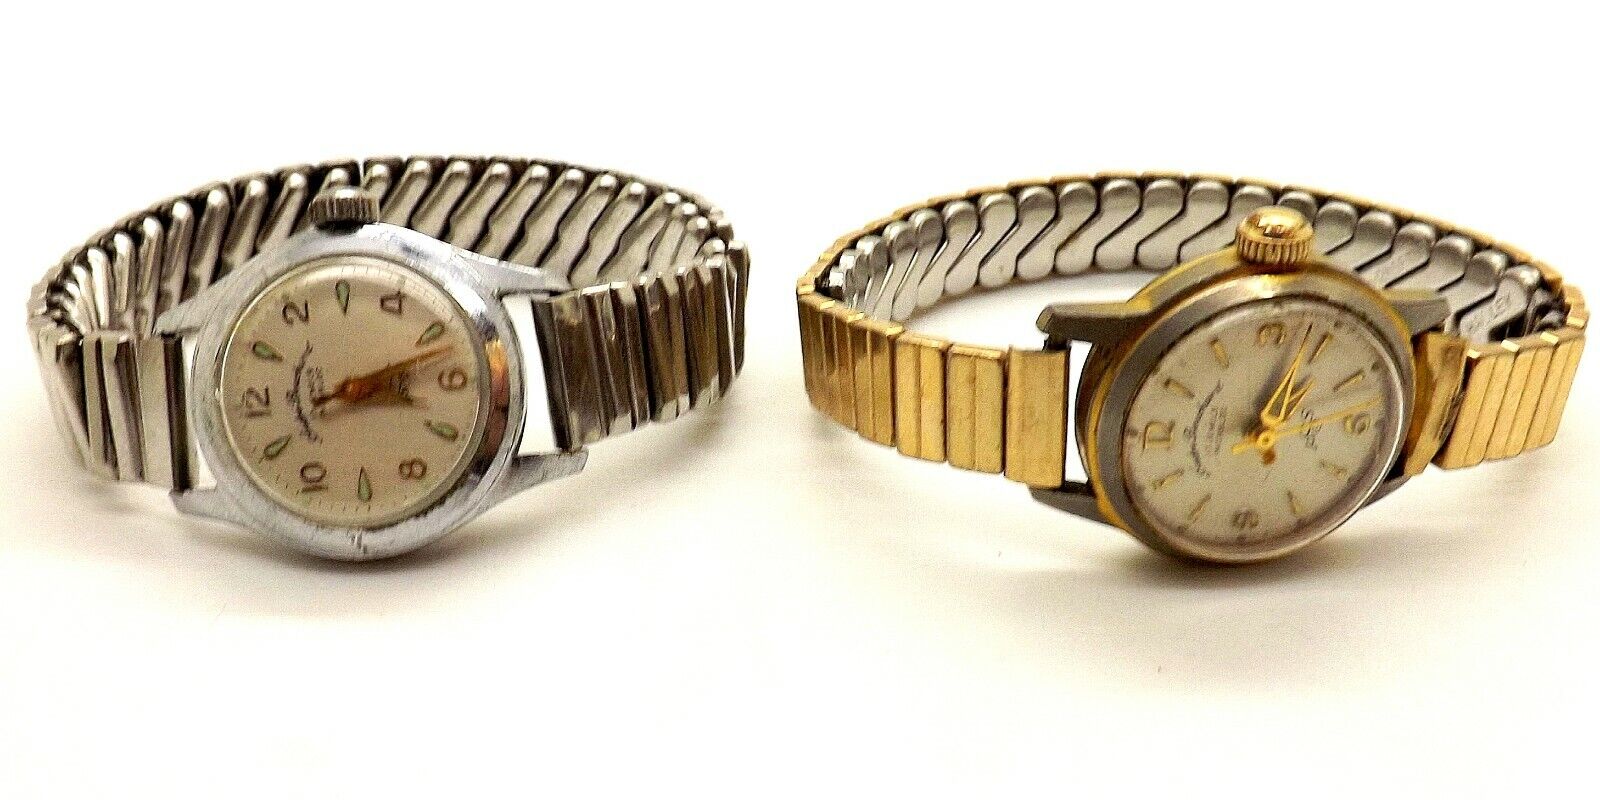 GREAT PAIR OF 1960'S LADIES ANDRÉ BOUCHARD 17J INCABLOC WRIST WATCHES